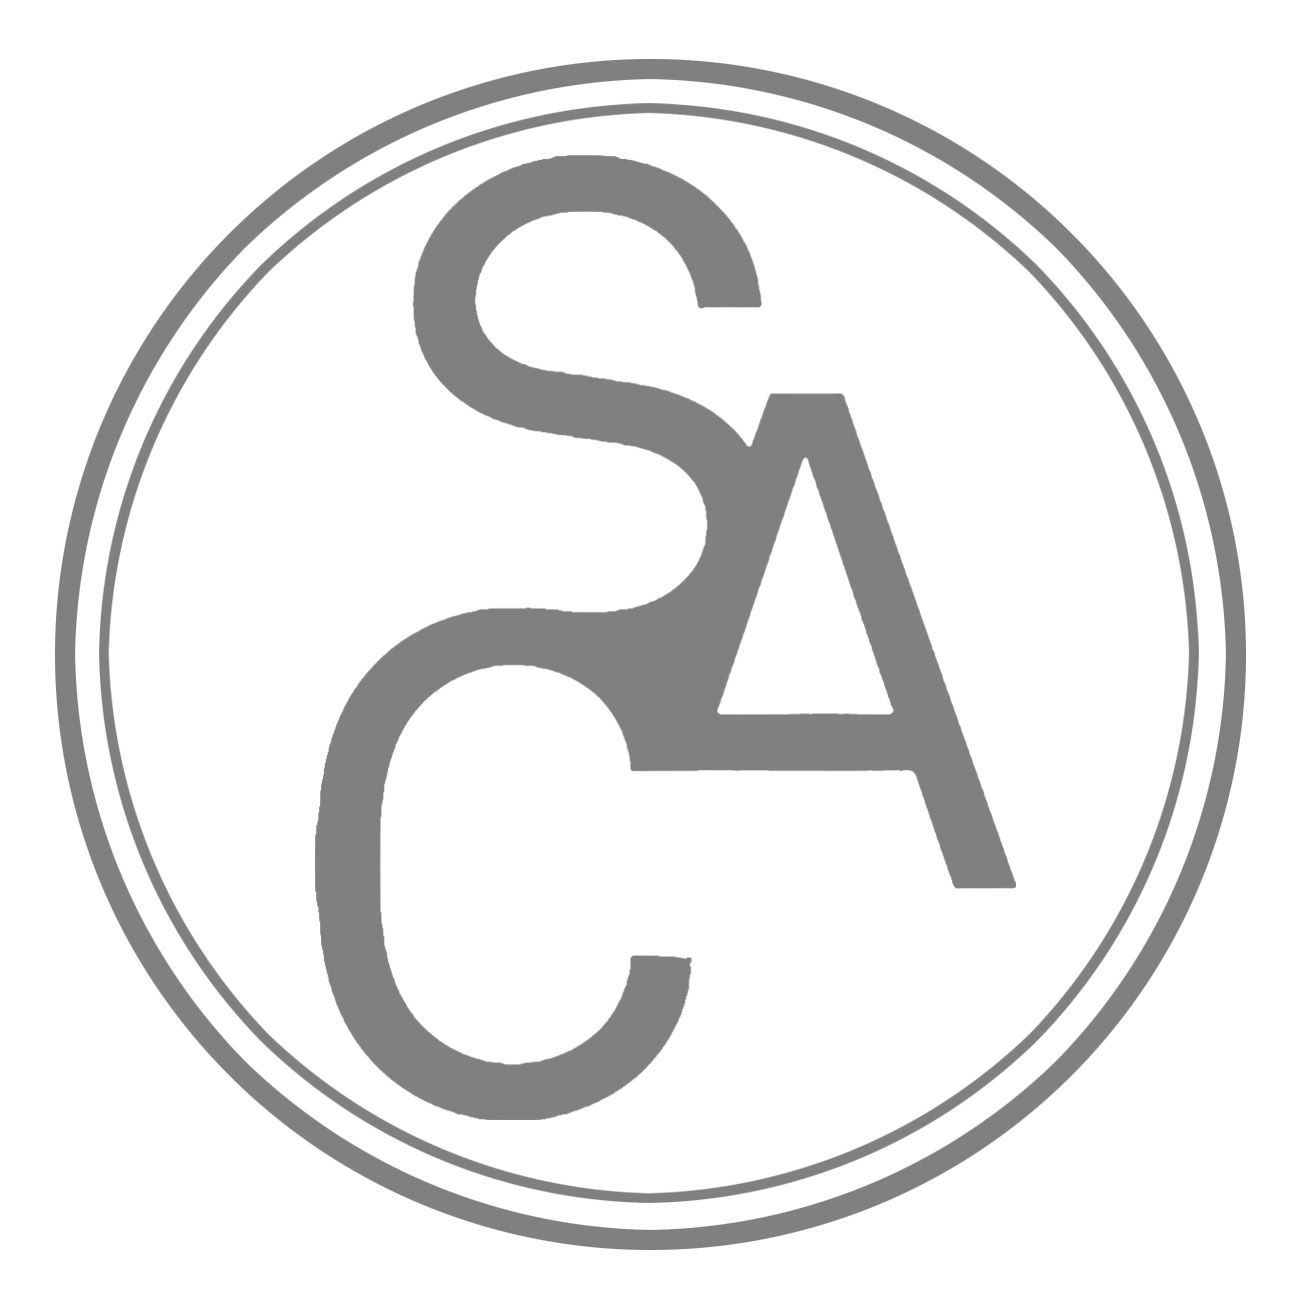 SAC (Architect & Engineers)|IT Services|Professional Services